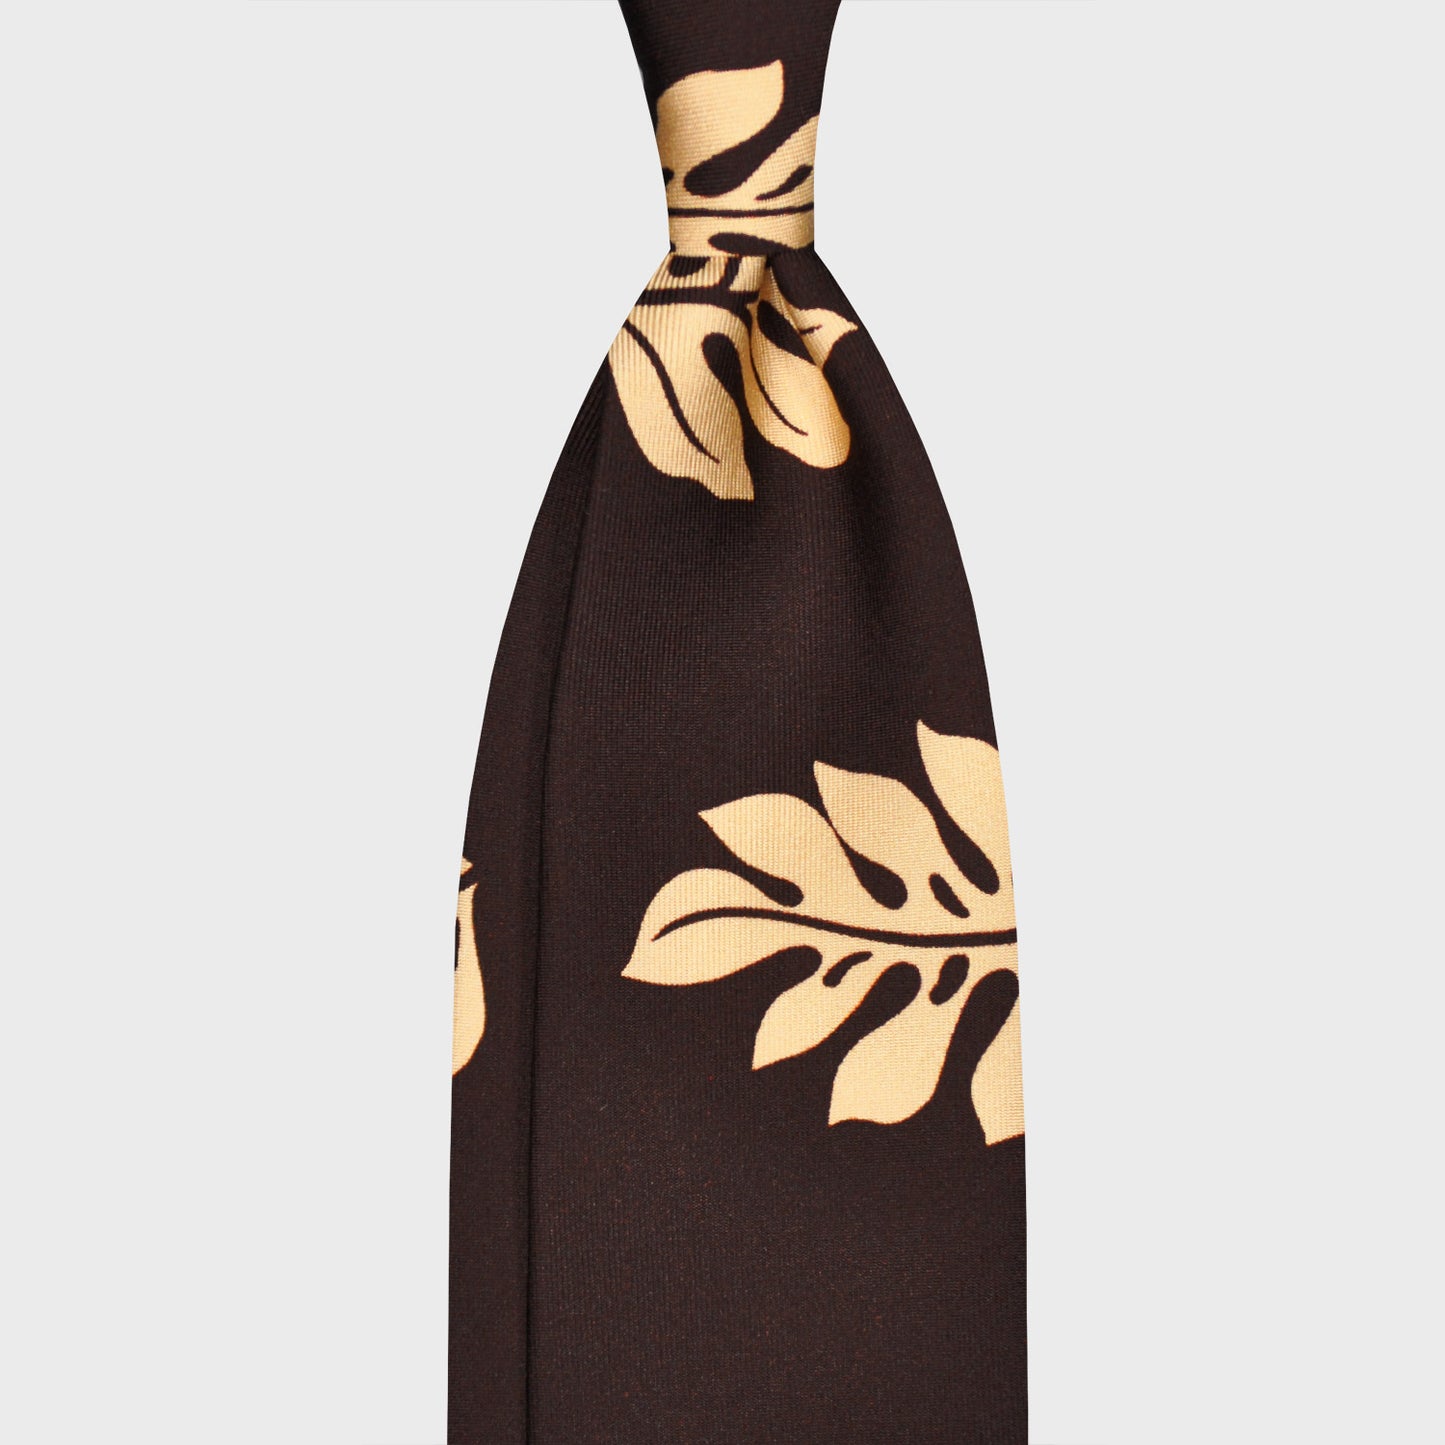 Load image into Gallery viewer, F.Marino Silk Tie 3 Folds Tropical Leaves Beige-Wools Boutique Uomo
